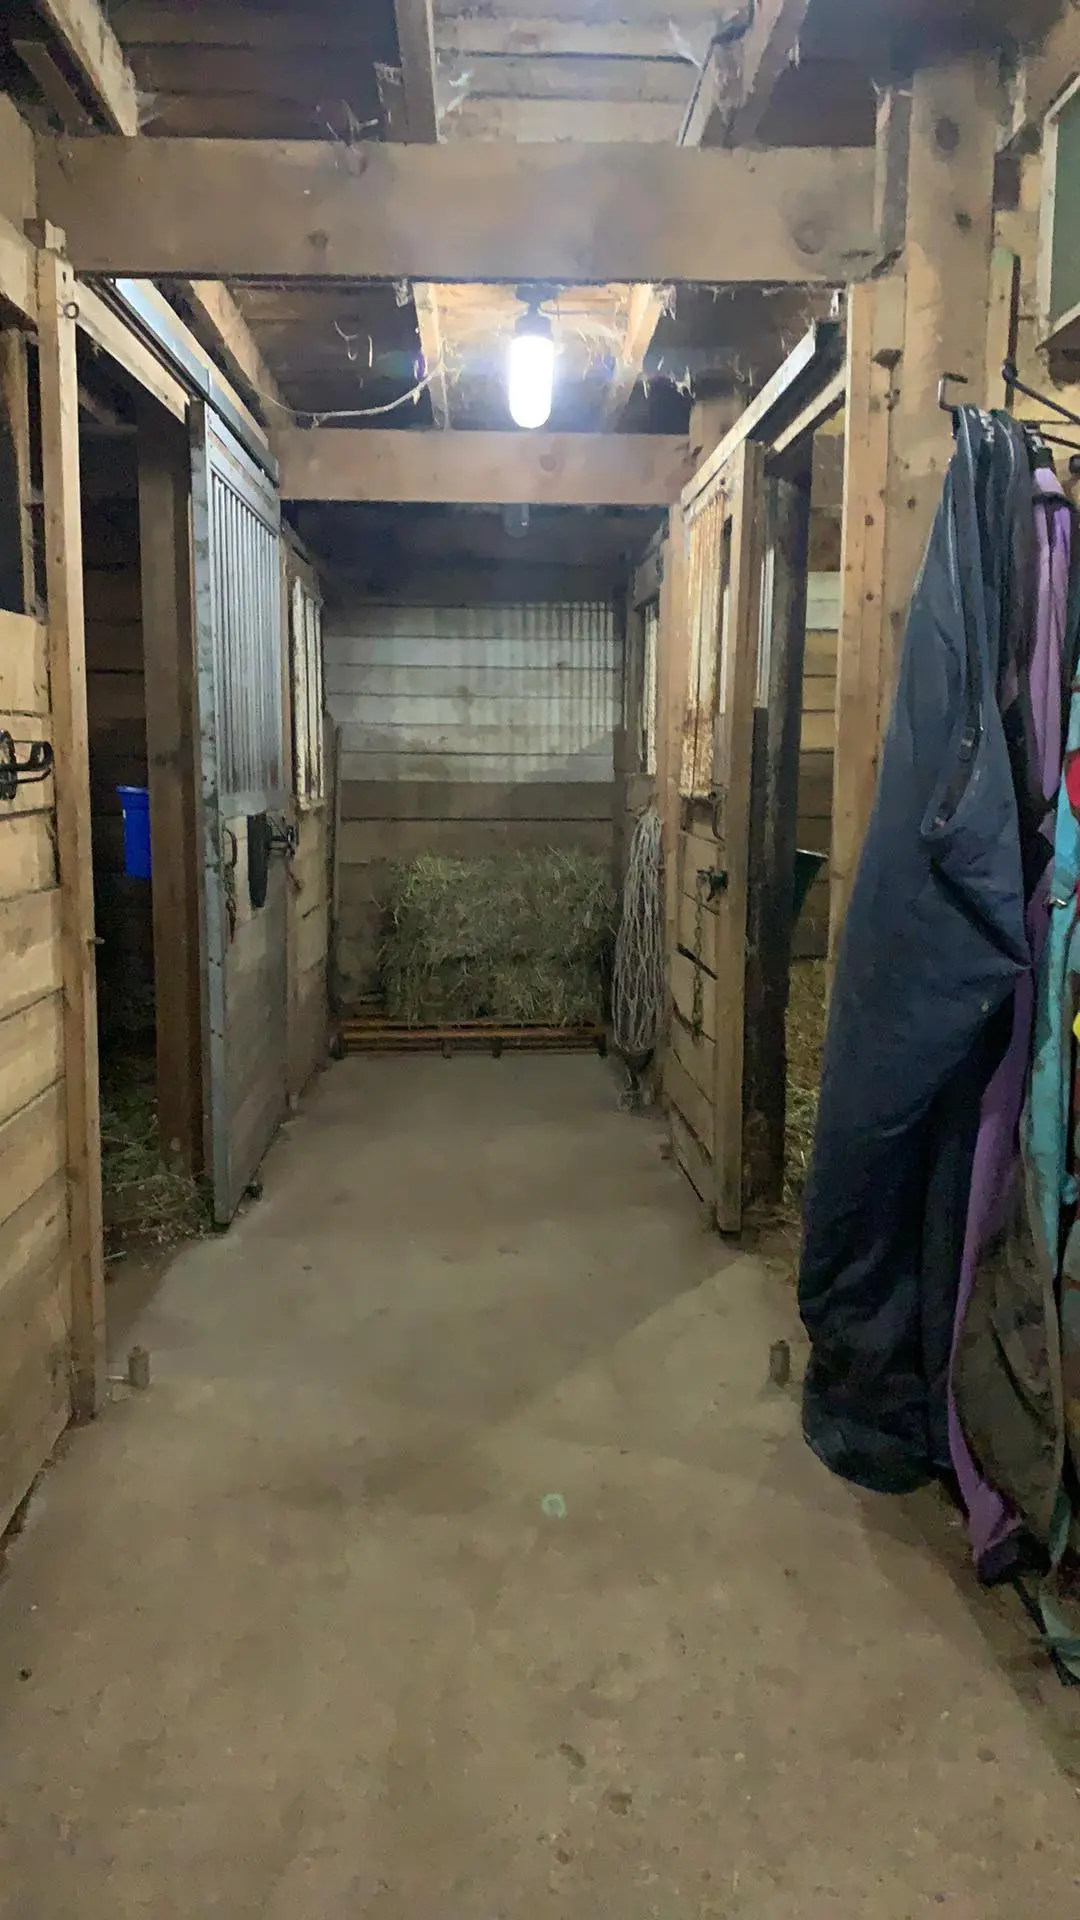 Stall Aisle with hay stored at end